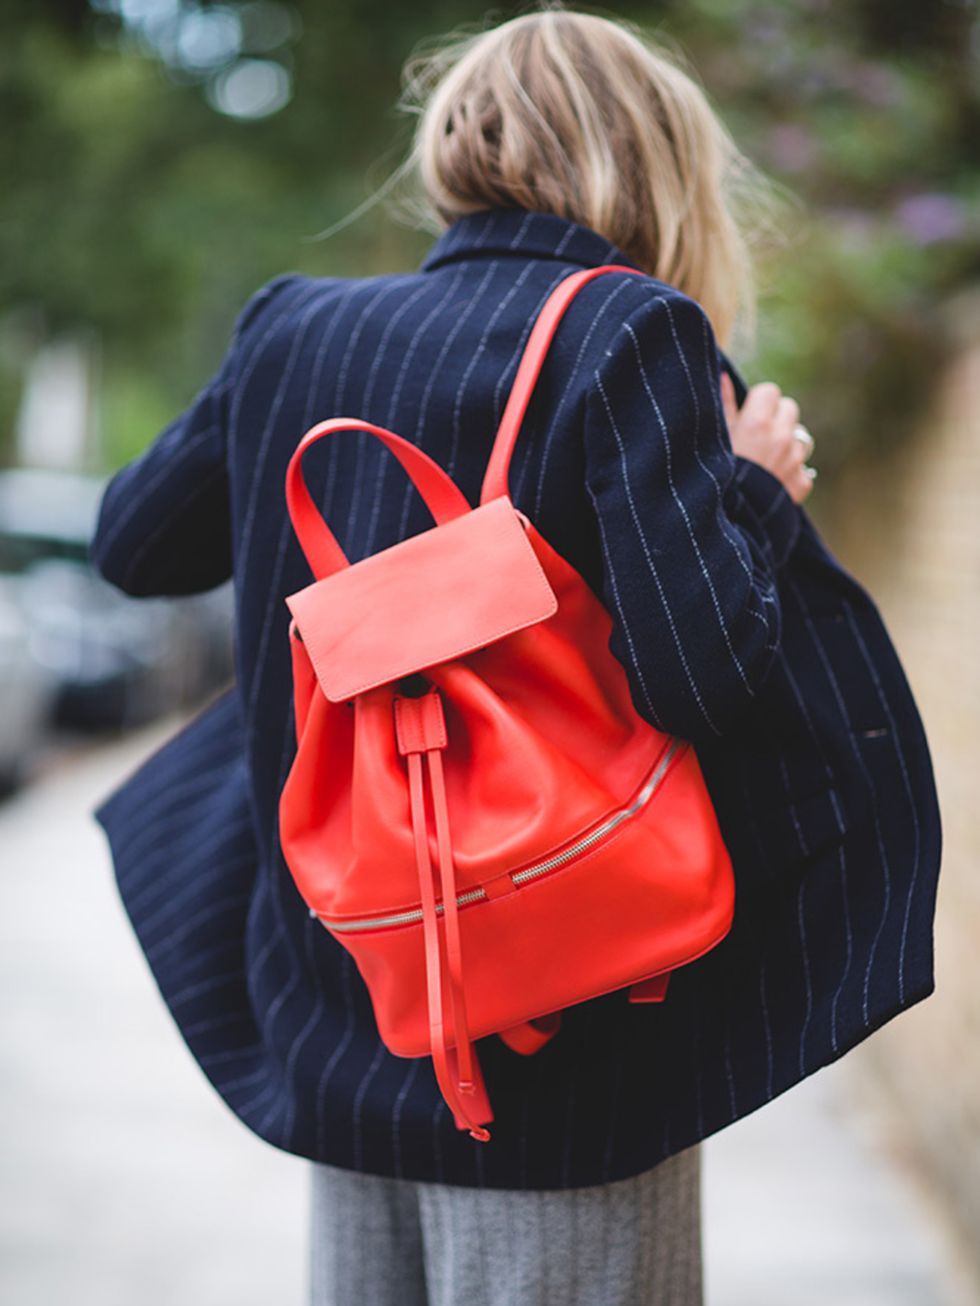 <p>Backpack, £295, from <a href="http://www.whistles.com/women/accessories/bags/soho-drawstring-rucksack-20812.html?dwvar_soho-drawstring-rucksack-20812_color=Red#start=1" target="_blank">Whistles </a></p>

<p>Blazer, £345, from <a href="http://uk.maje.co